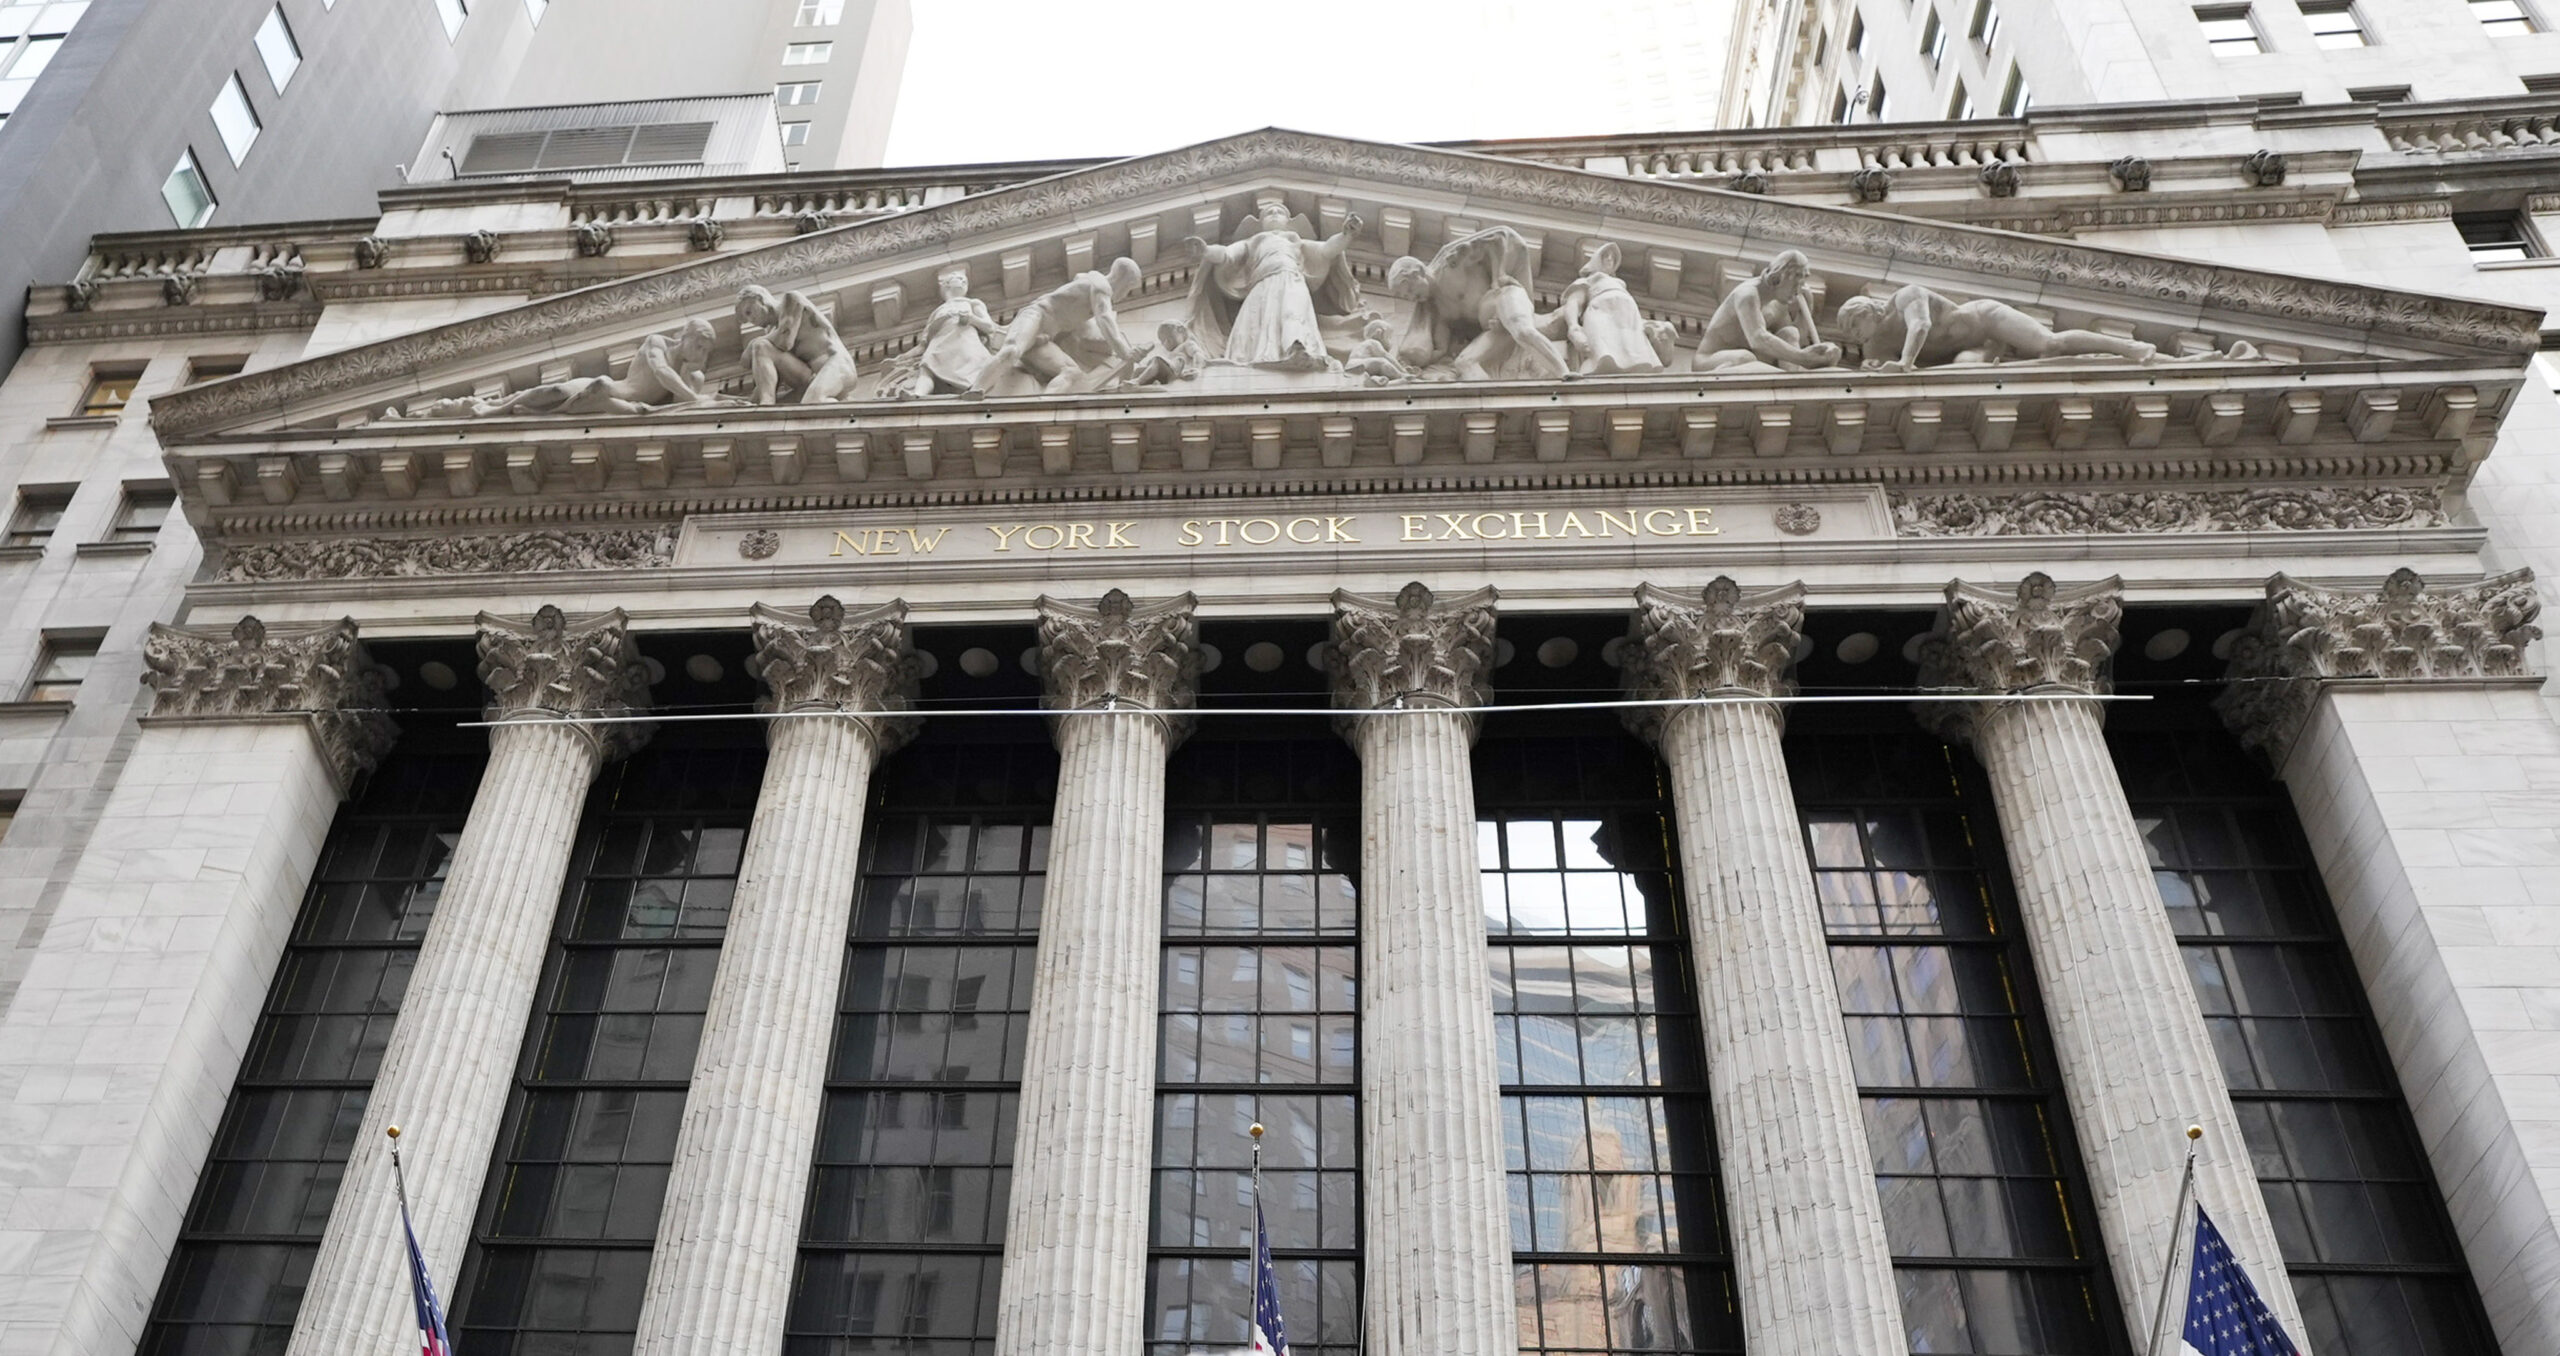 New York Stock Exchange: Research on US blue-chip companies shows share prices fell while executive pay rose across some sectors (Photo: Ilya S. Savenok/Getty Images) 